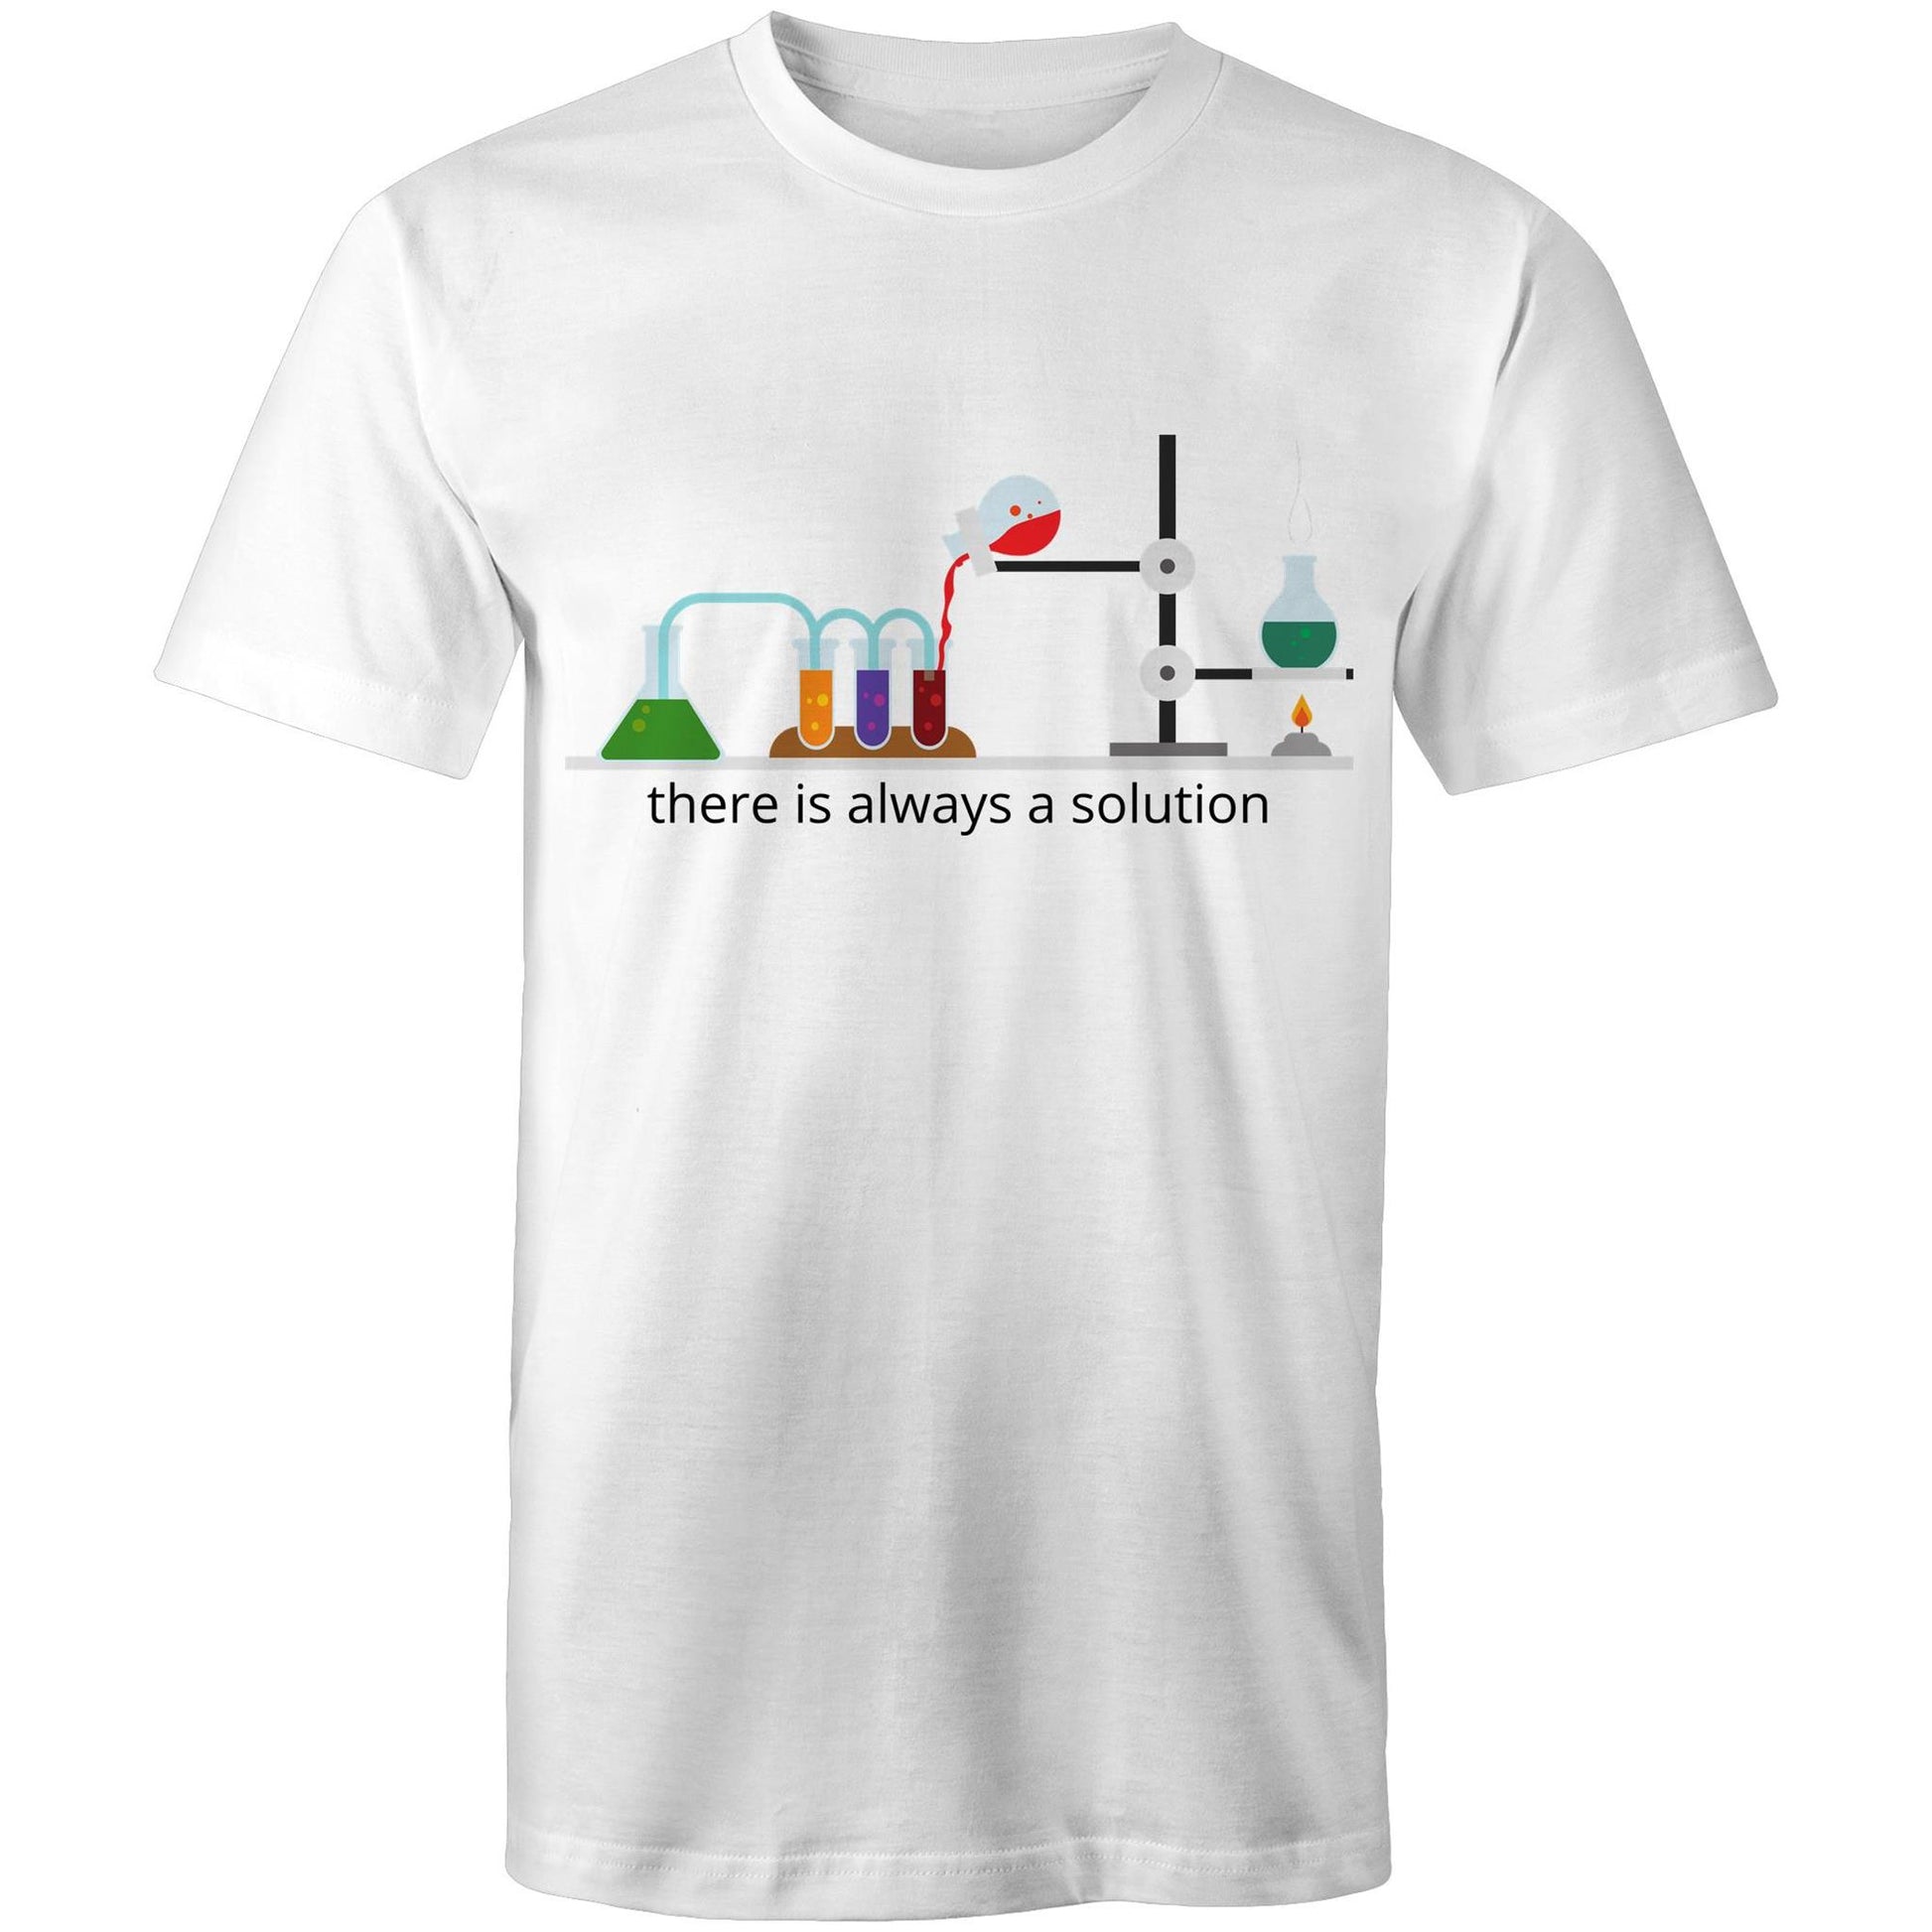 There Is Always A Solution, In Colour - Mens T-Shirt White Mens T-shirt Mens Science